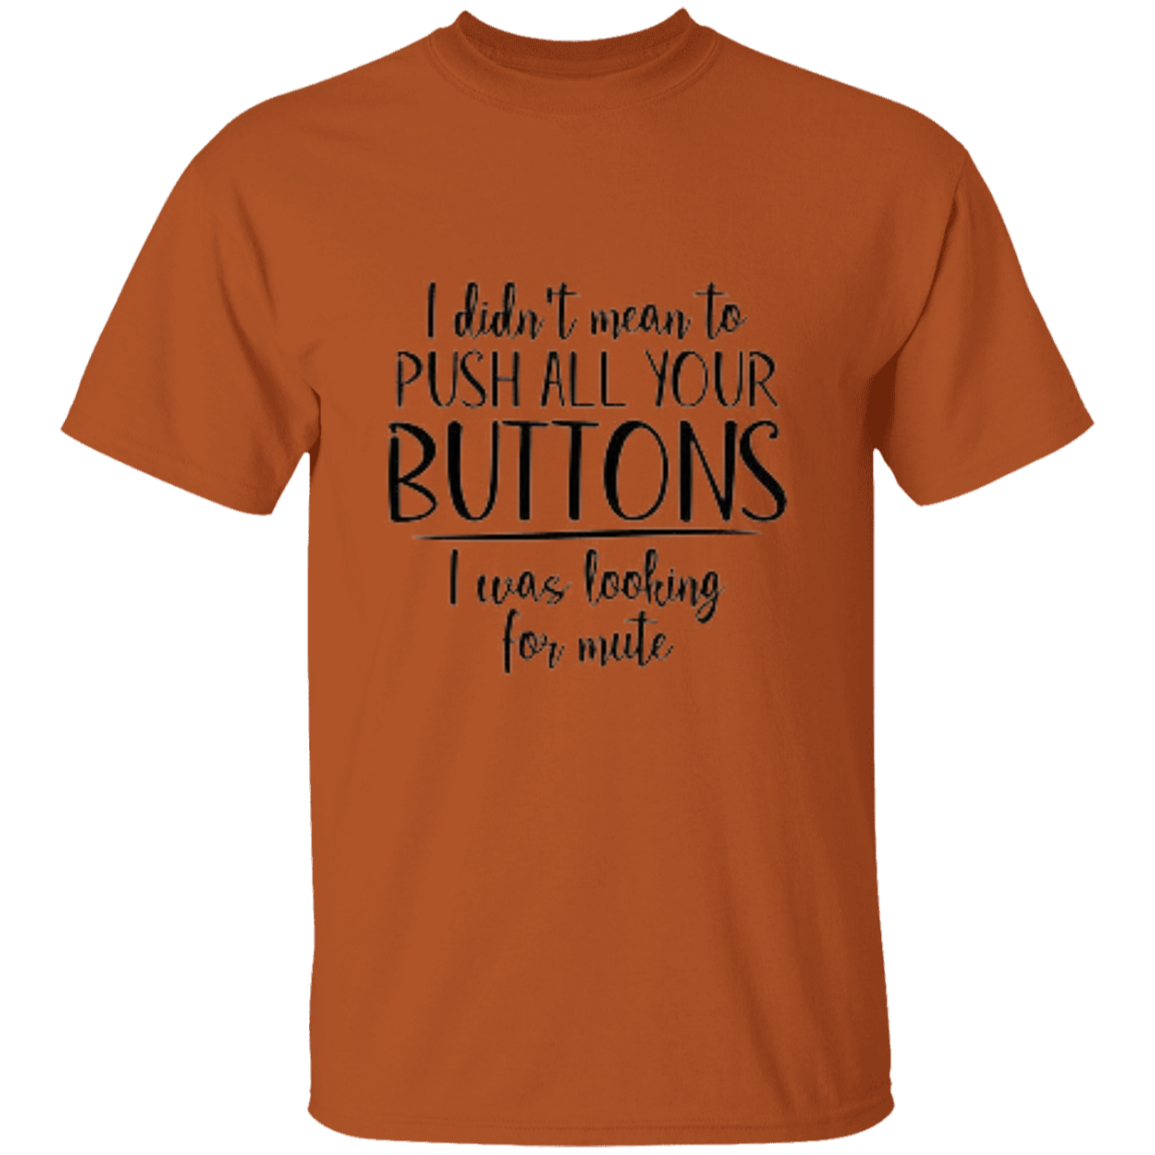 I Didn't Mean To Push All Your Buttons 5.3 oz. T-Shirt